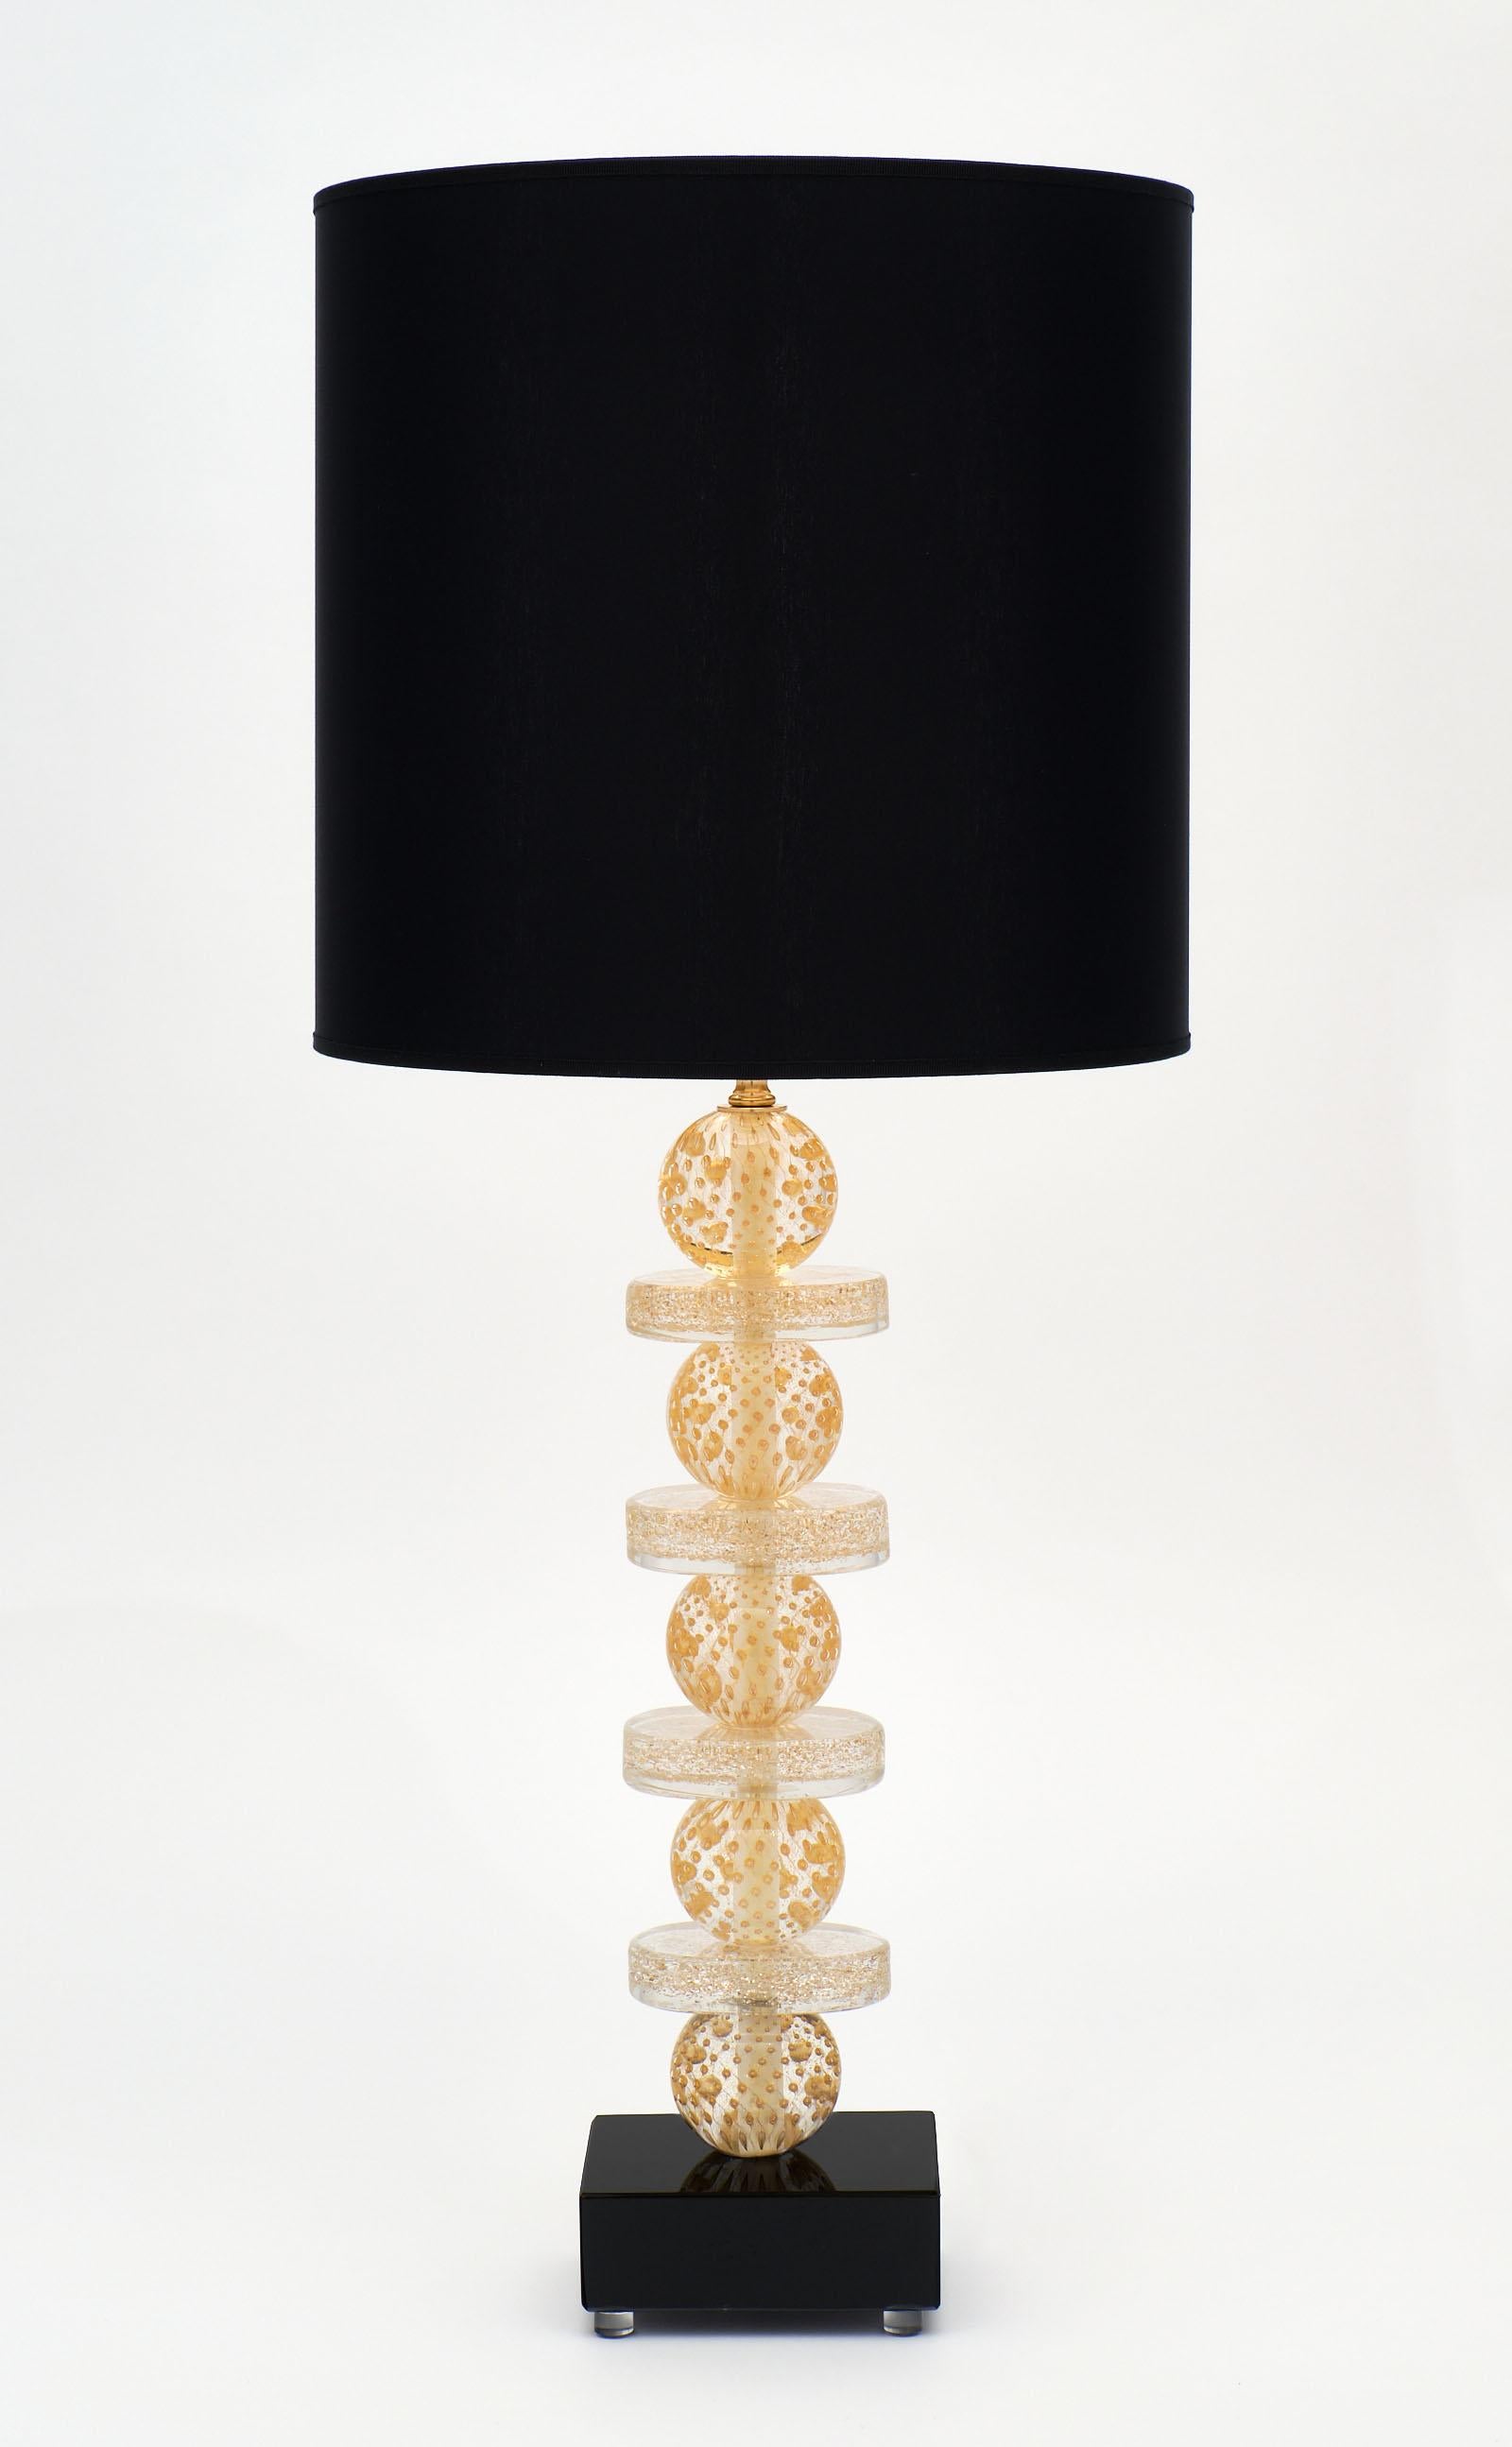 A pair of Murano glass gold and black lamps featuring a combination of glass spheres and rings in the Avventurina technique, created by infusing the glass with 23 carat gold leaf. The stem rests on a black glass base, and the height of glass is